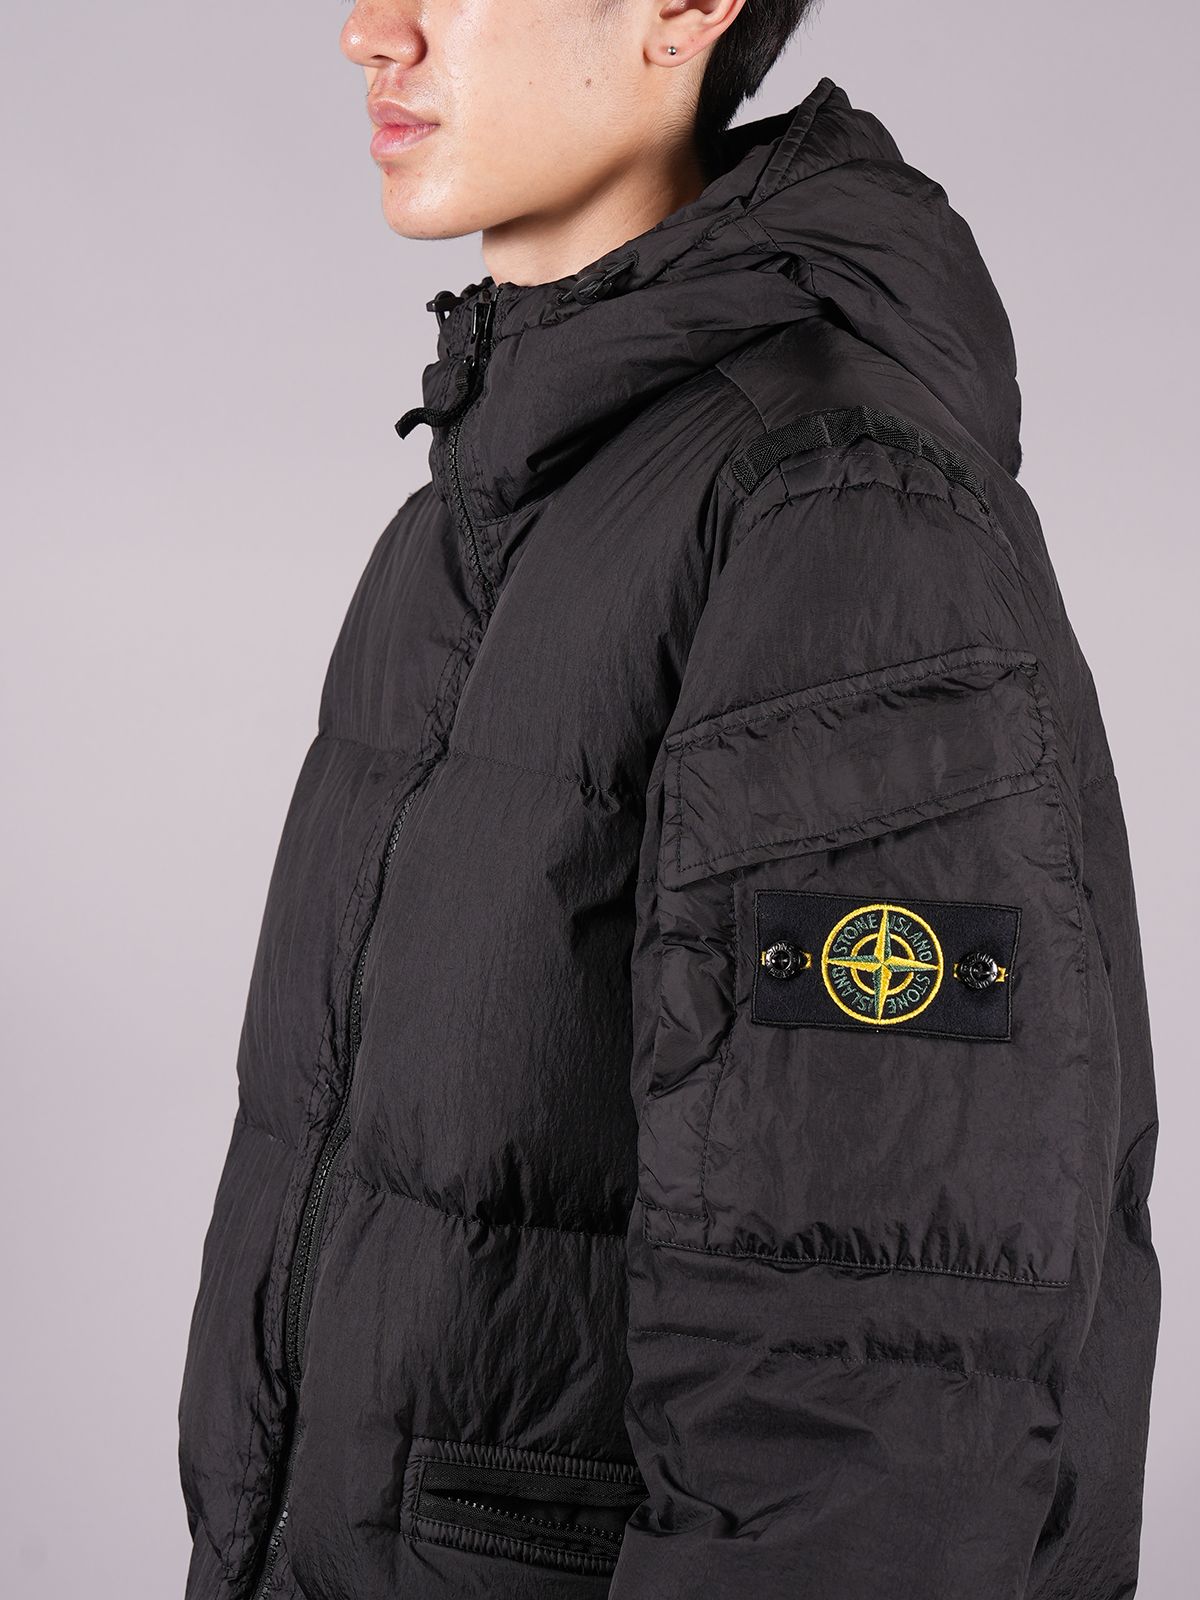 STONE ISLAND - 【ラスト1点】 GARMENT DYED CRINKLE REPS R-NY 